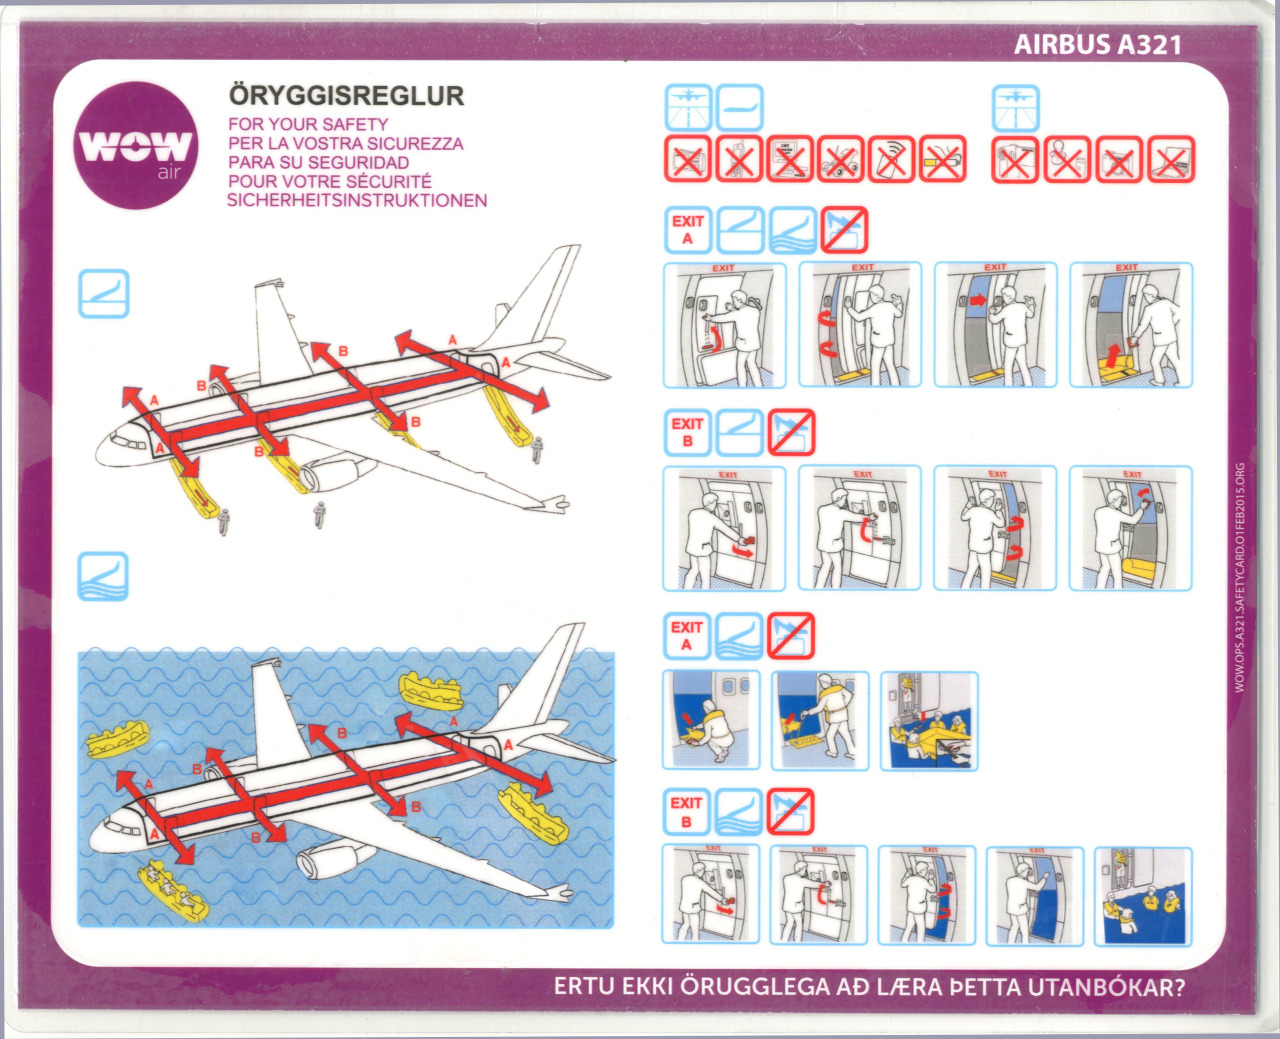 American Airlines Airbus A321S Safety Card